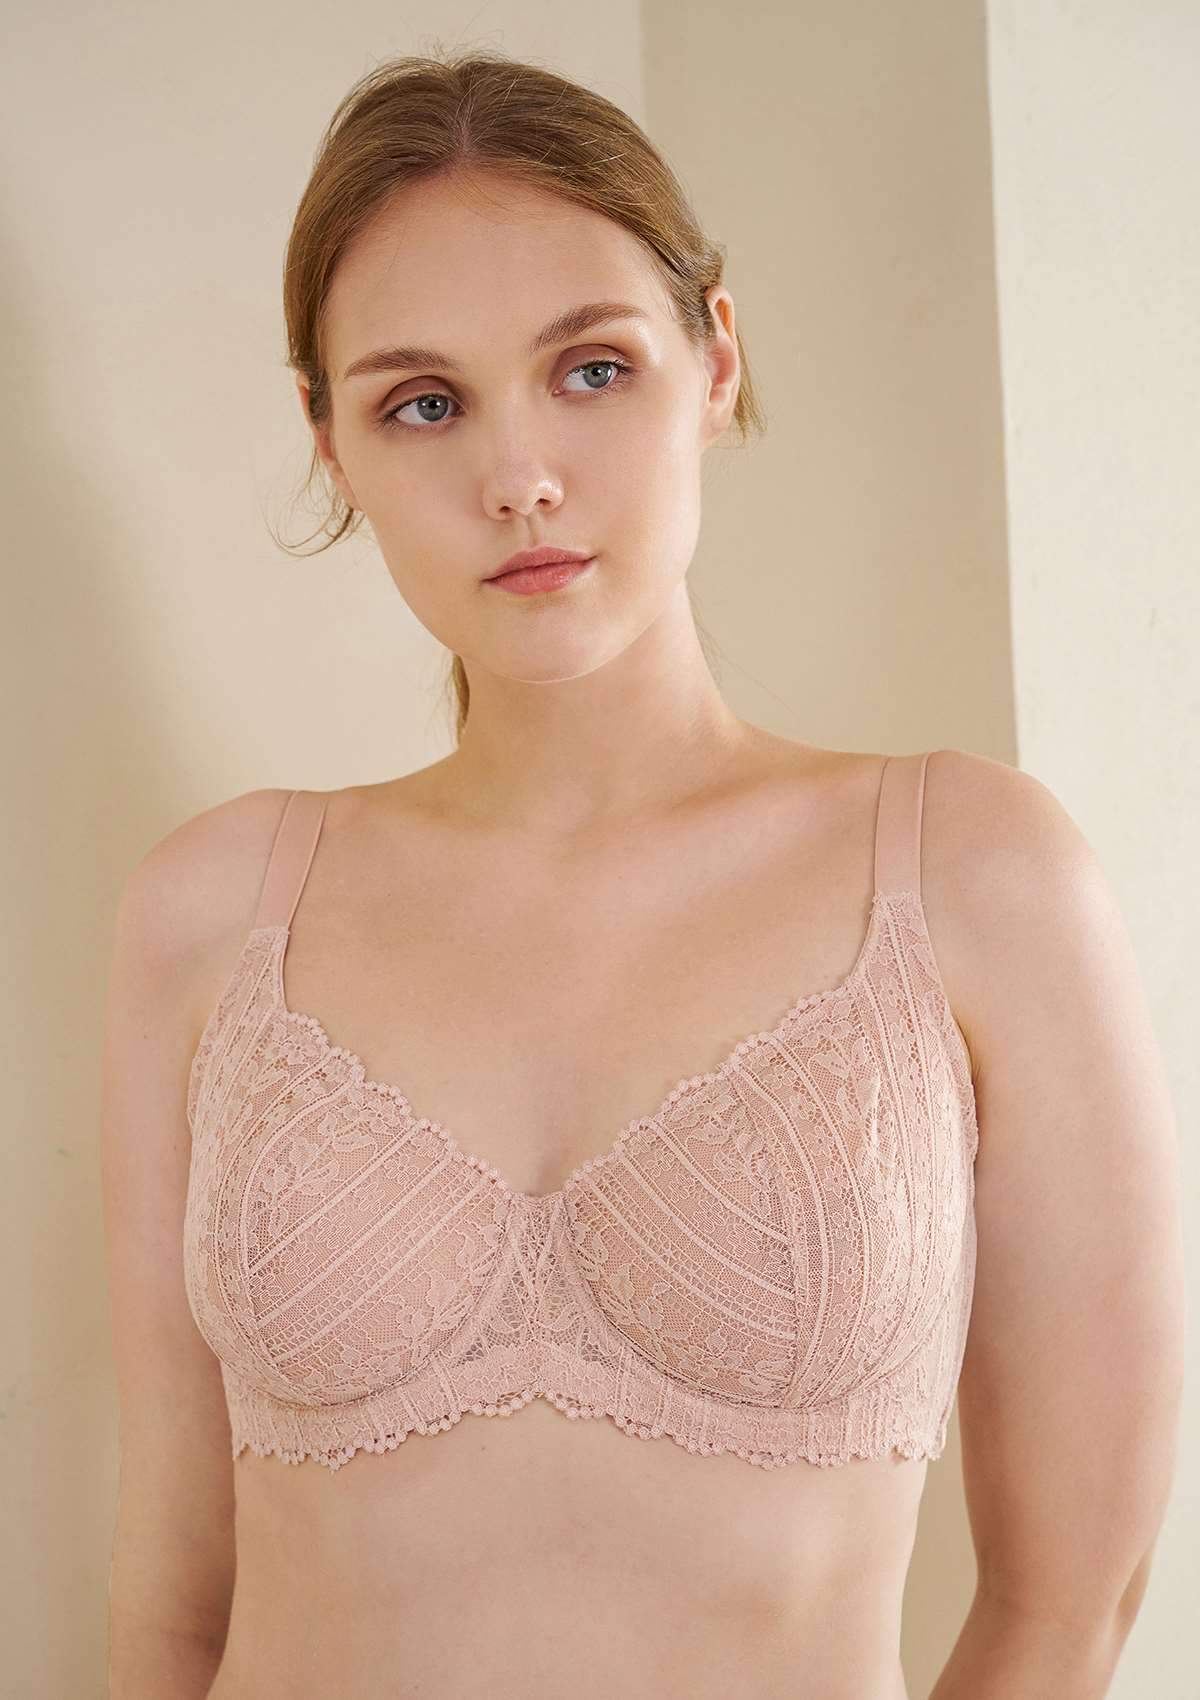 HSIA Vertical Lace Up Bra: Plus Size Back Smoothing Bra - Light Pink / 34 / DDD/F